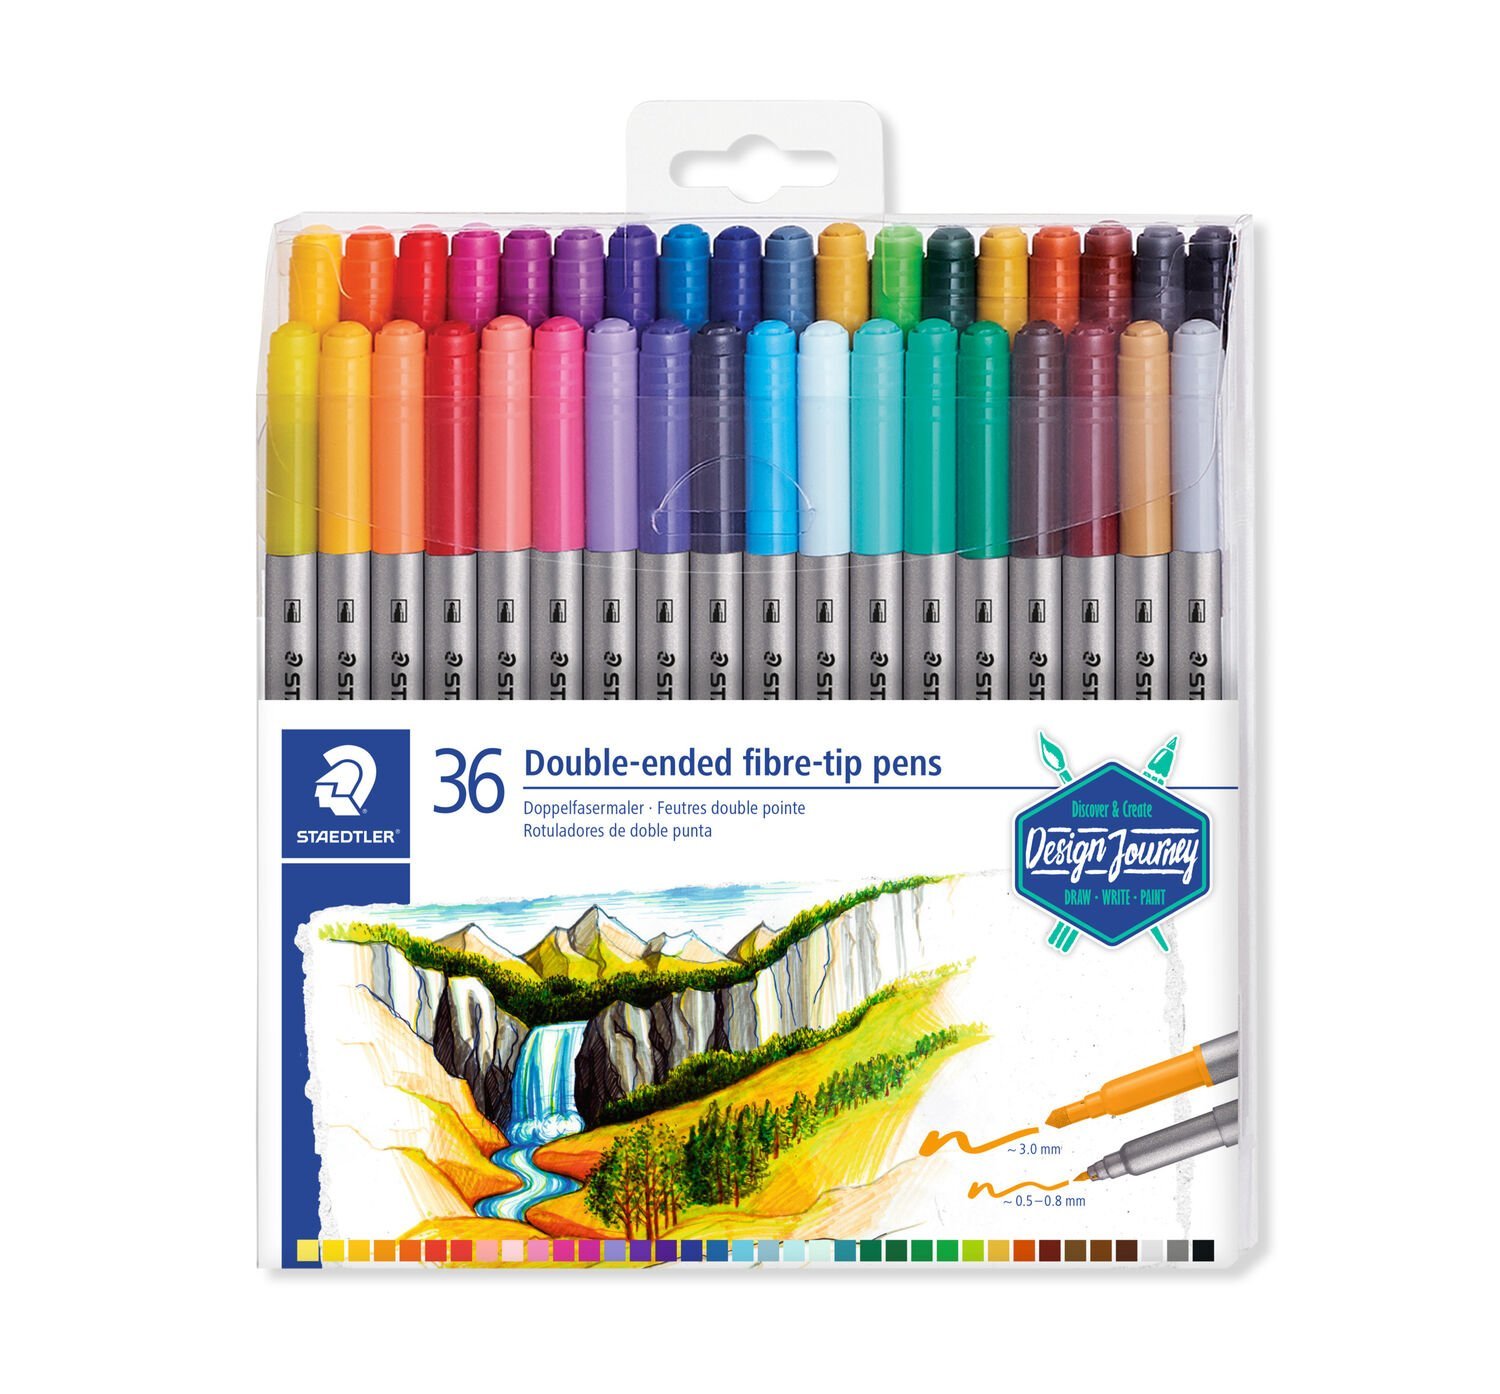 Wallet containing 36 double-ended fibre-tip pens in assorted colours